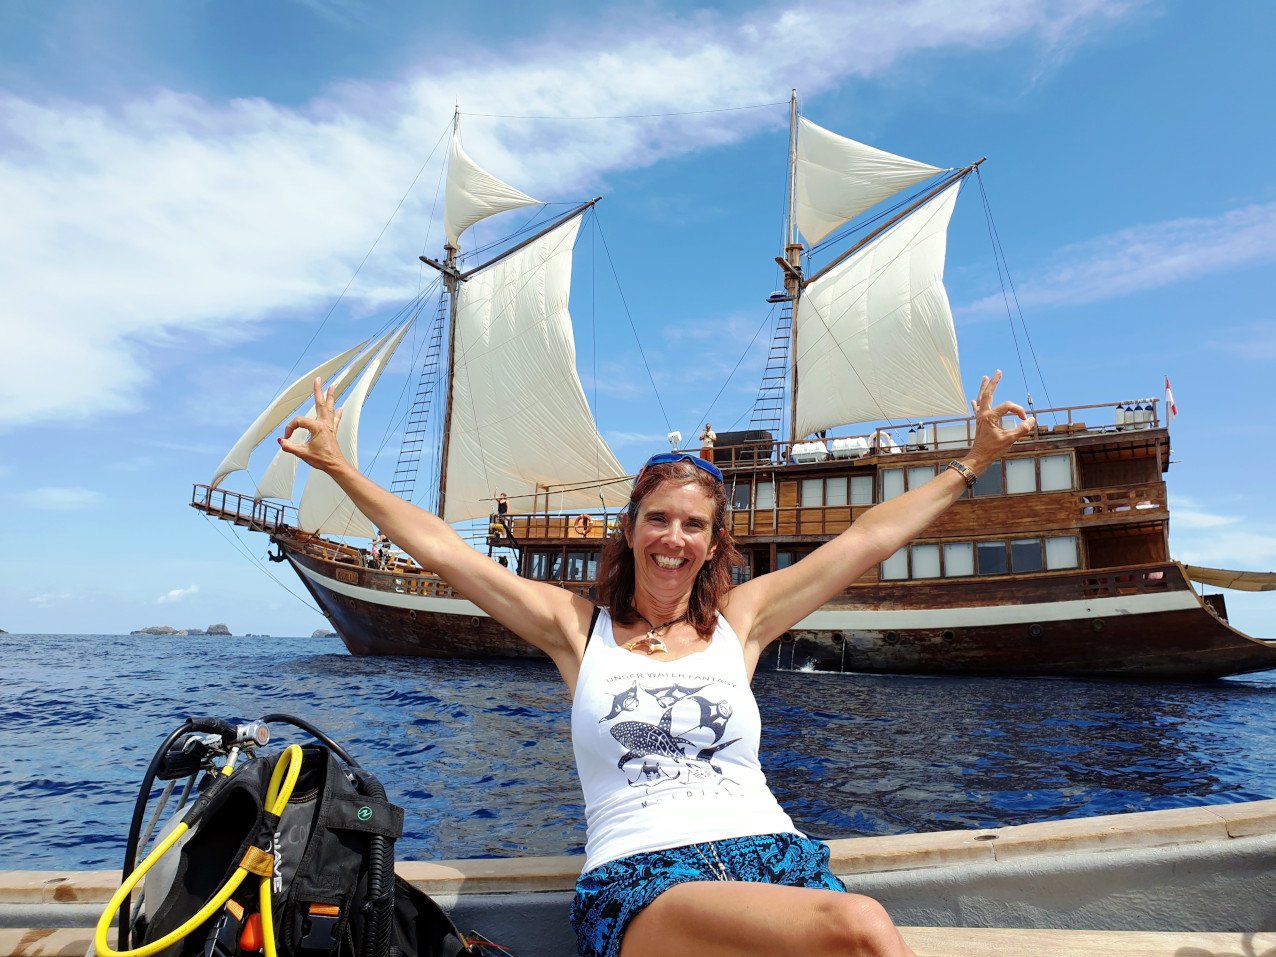 Papua Explorers Guest Gabby sitting on the tender with Coralia Liveaboard in the background